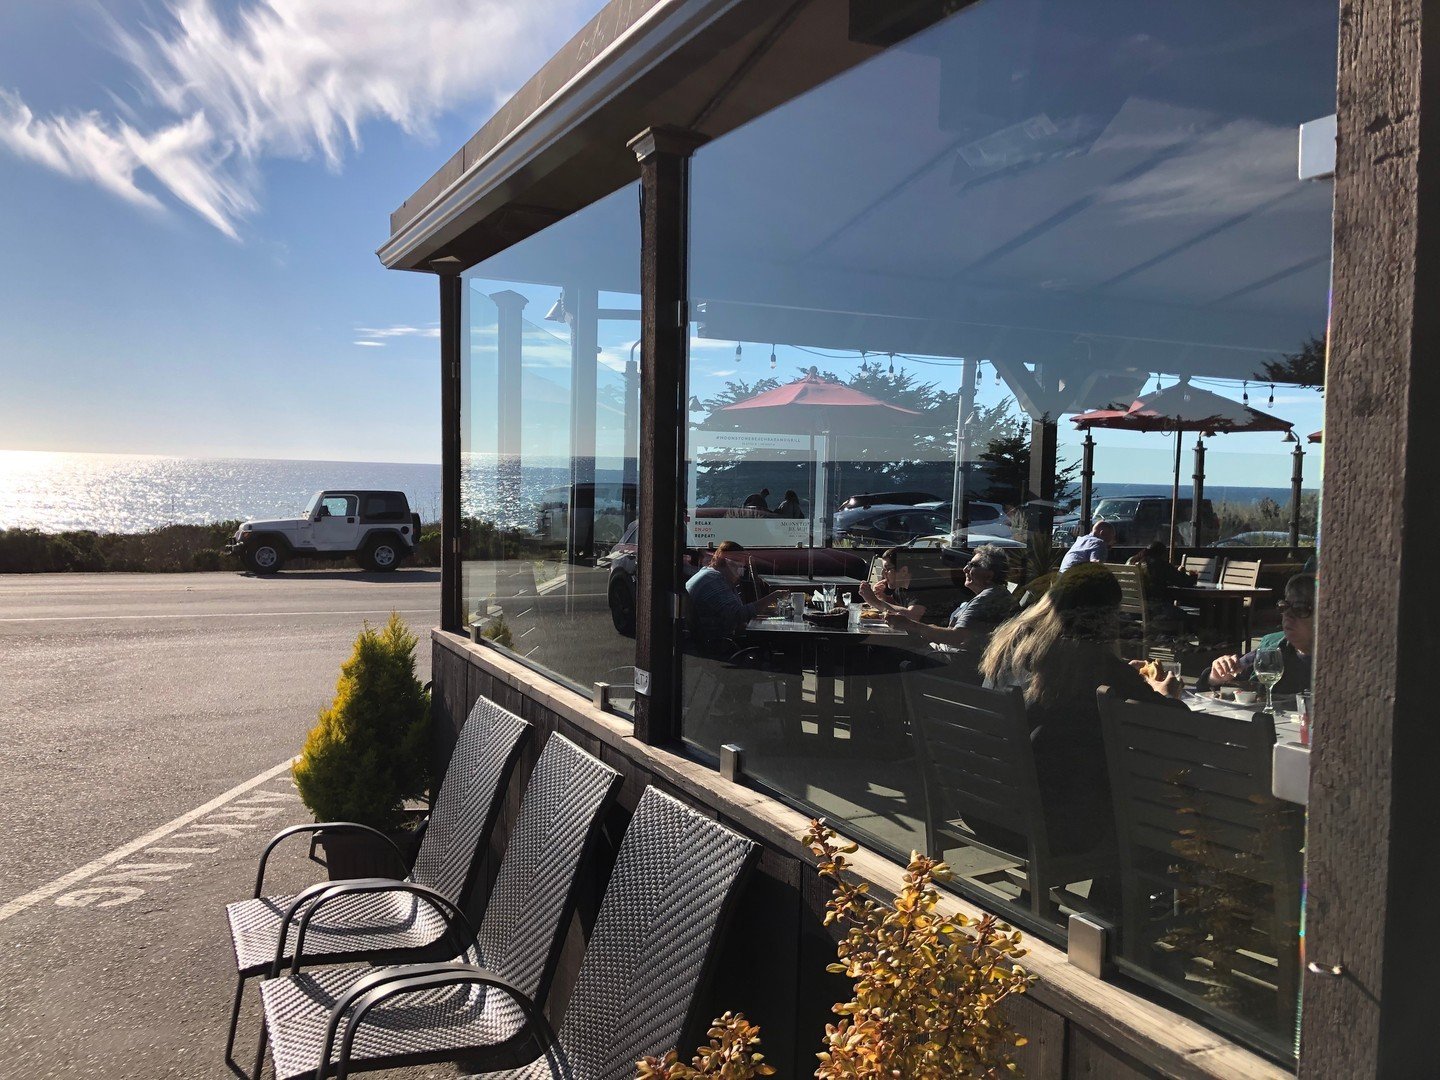 Five star food &amp; a view like that, what more could we need? 🤩